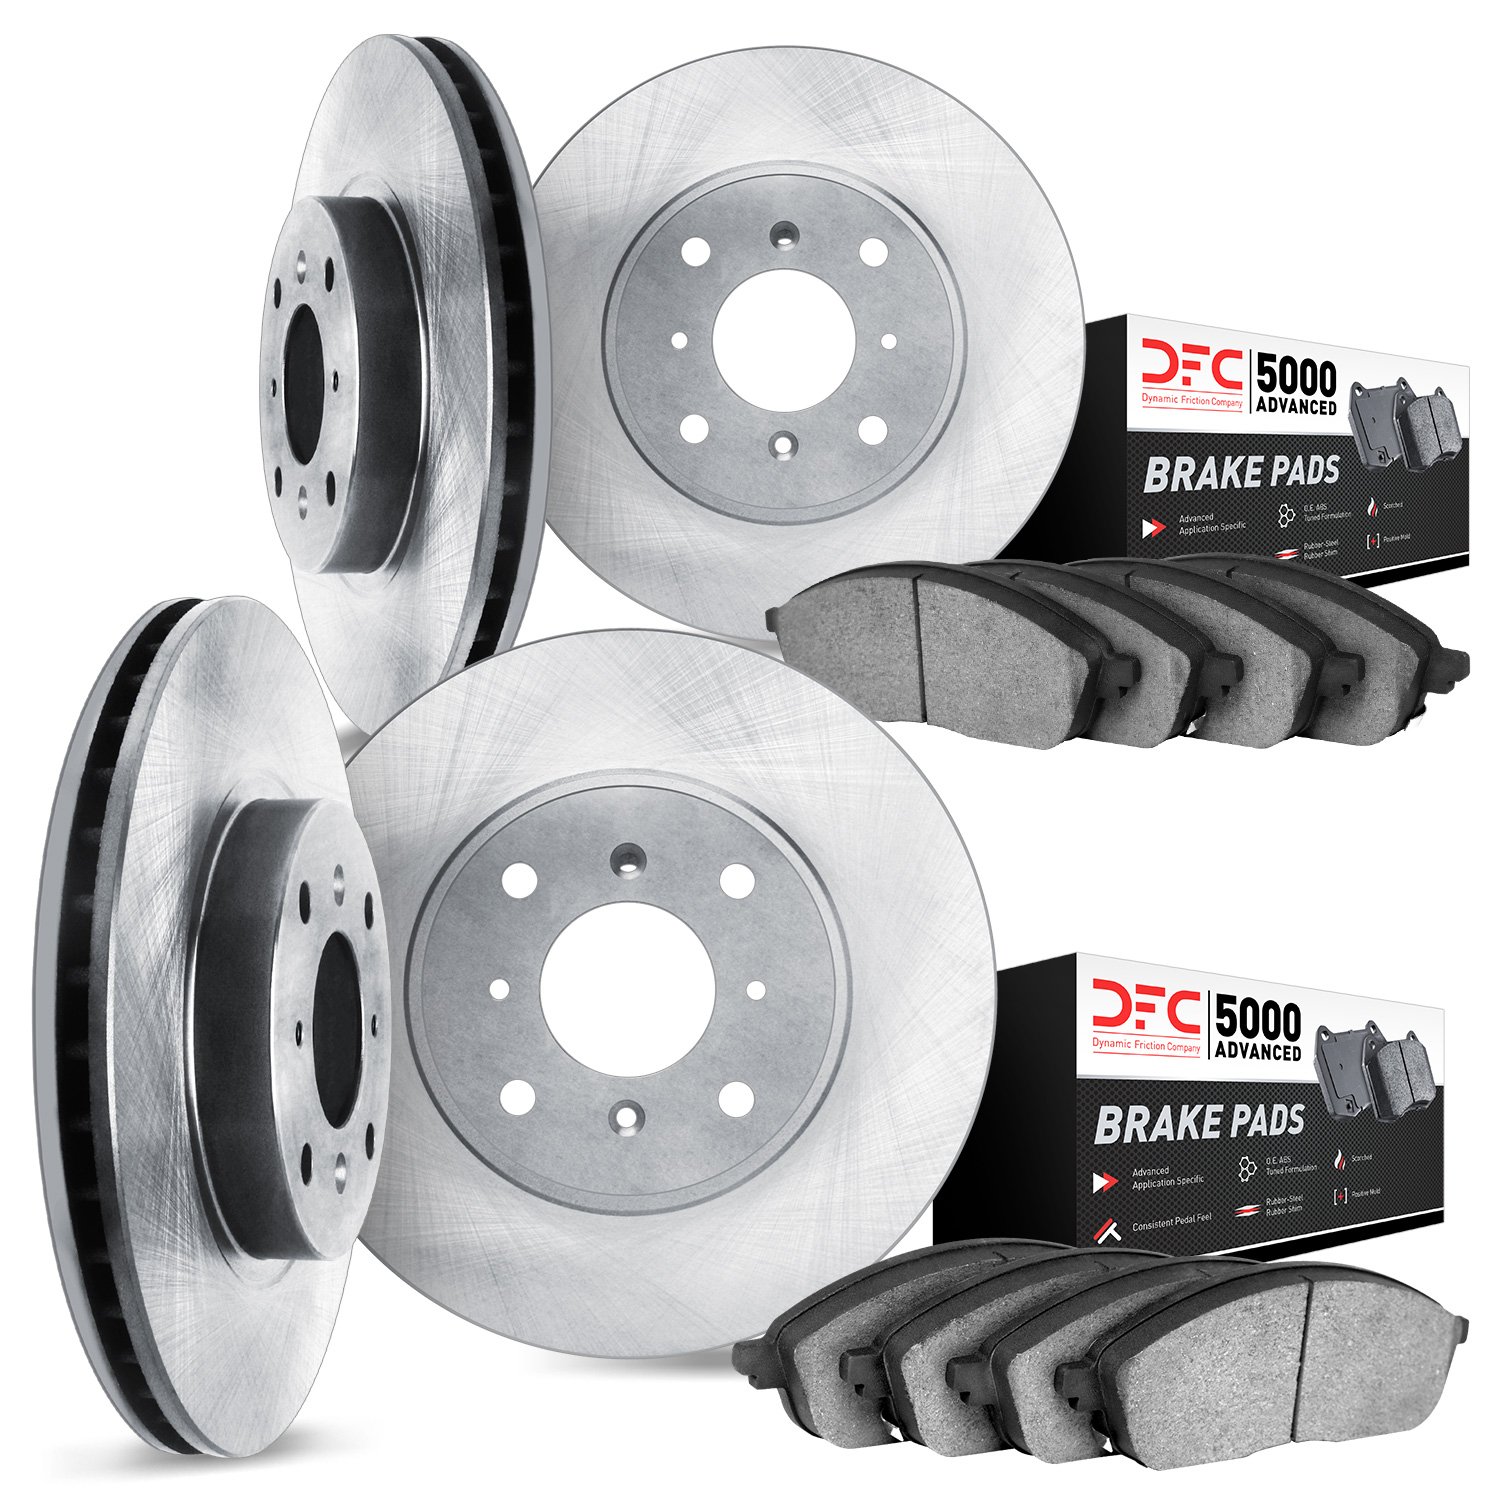 6504-56101 Brake Rotors w/5000 Advanced Brake Pads Kit, 1998-1999 Ford/Lincoln/Mercury/Mazda, Position: Front and Rear